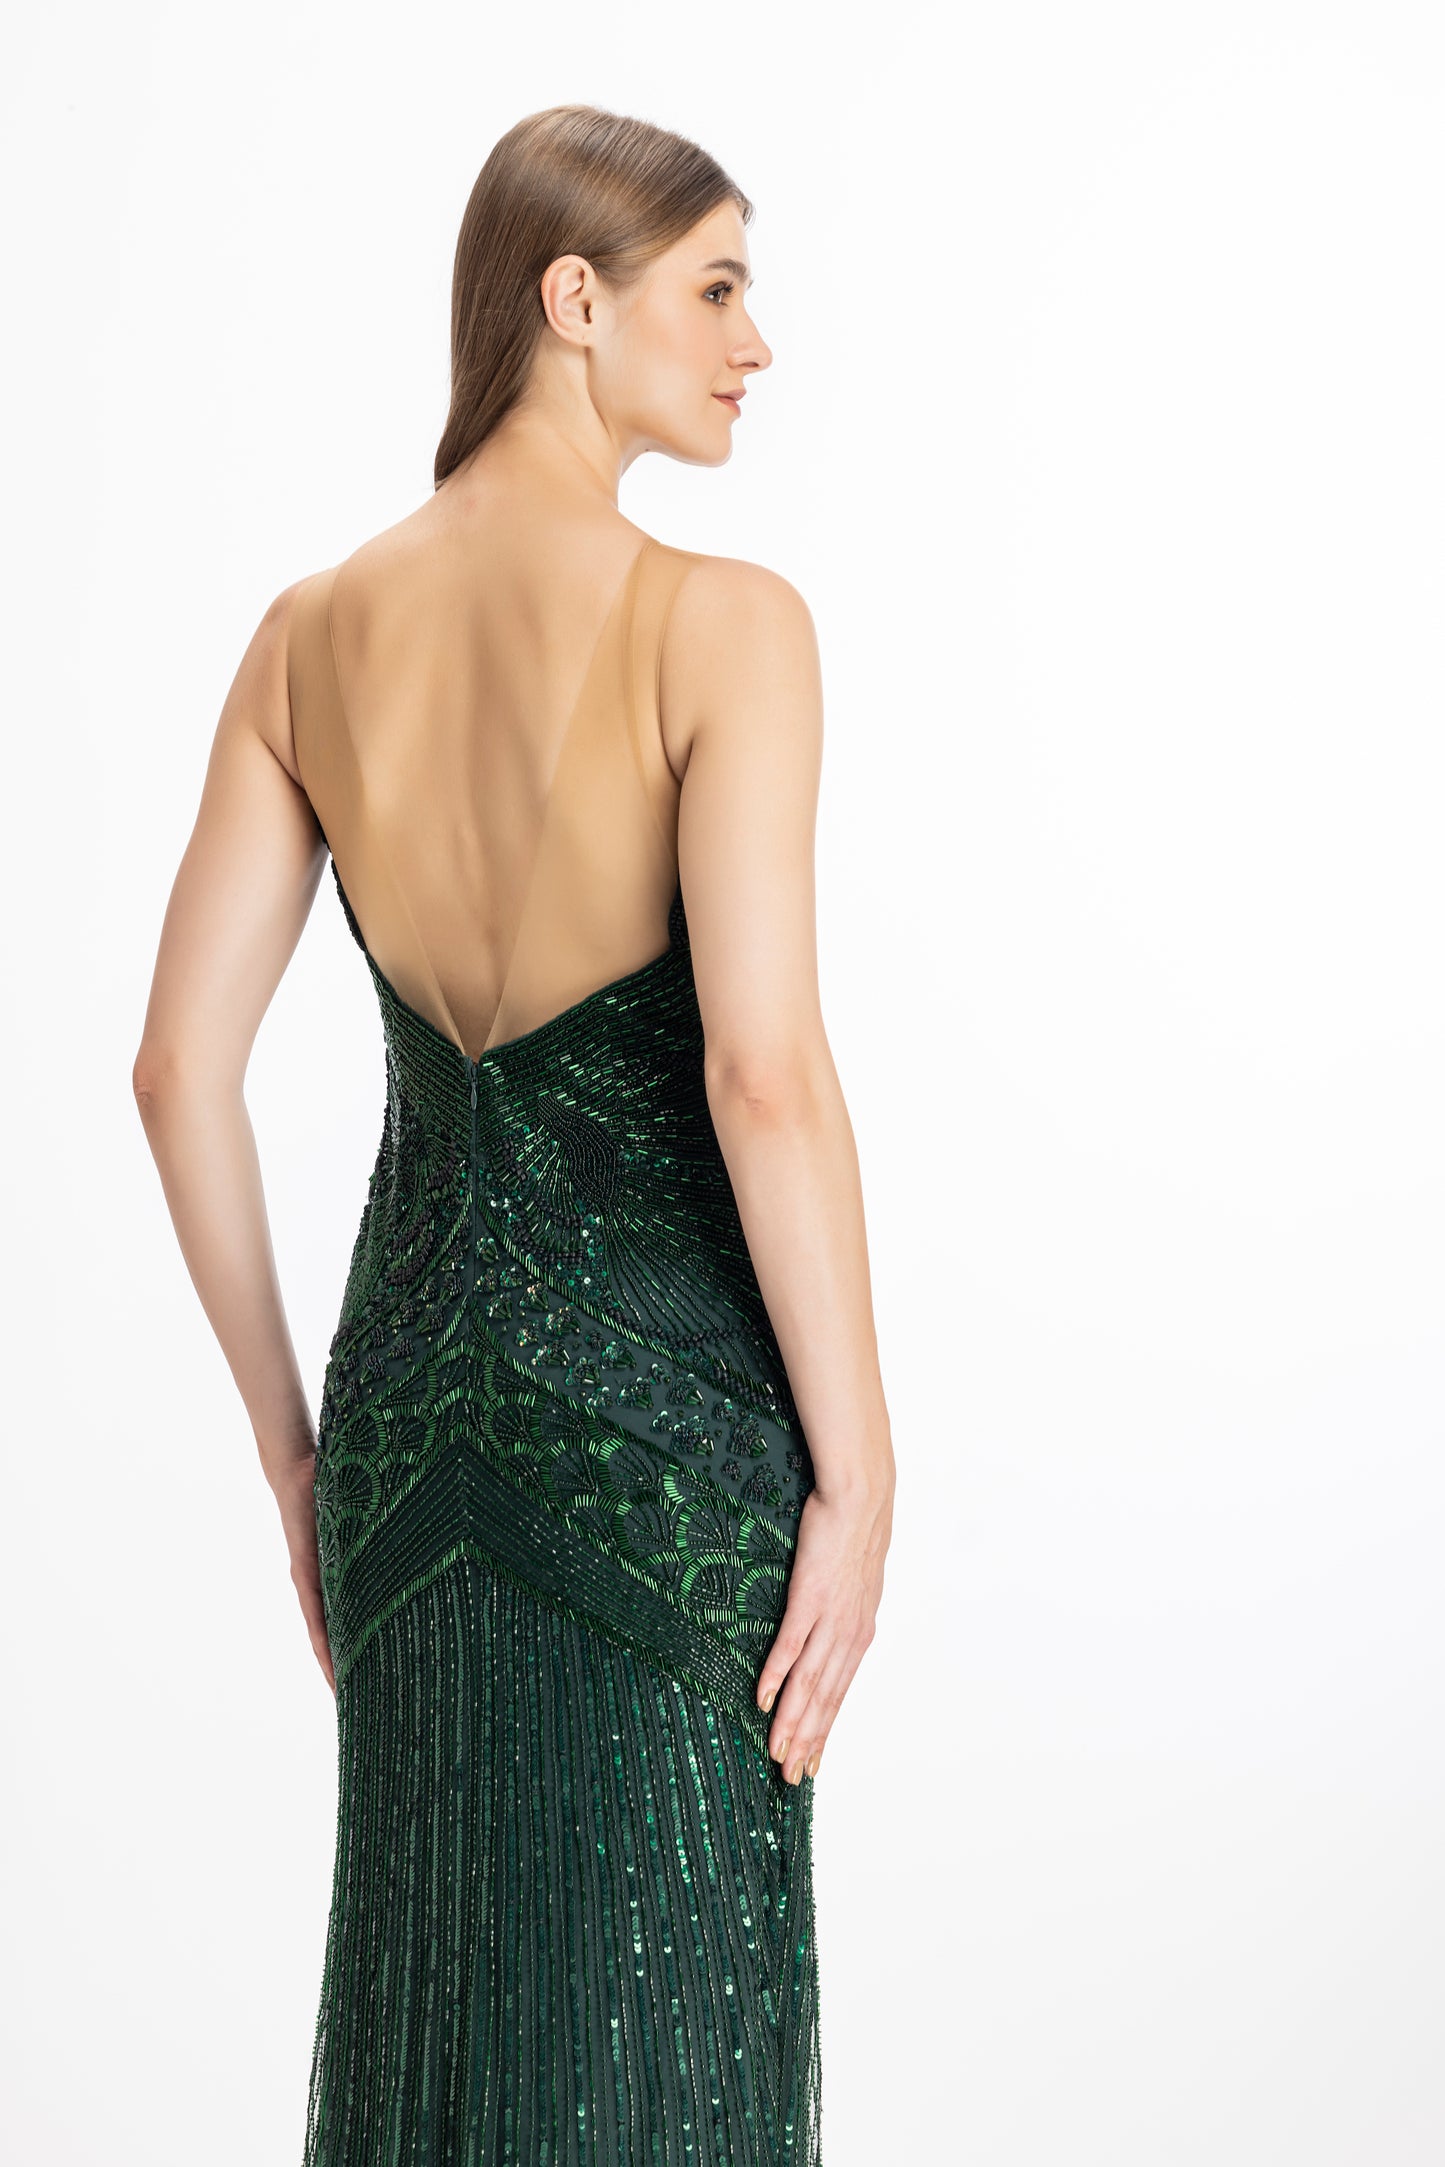 FISH GOWN